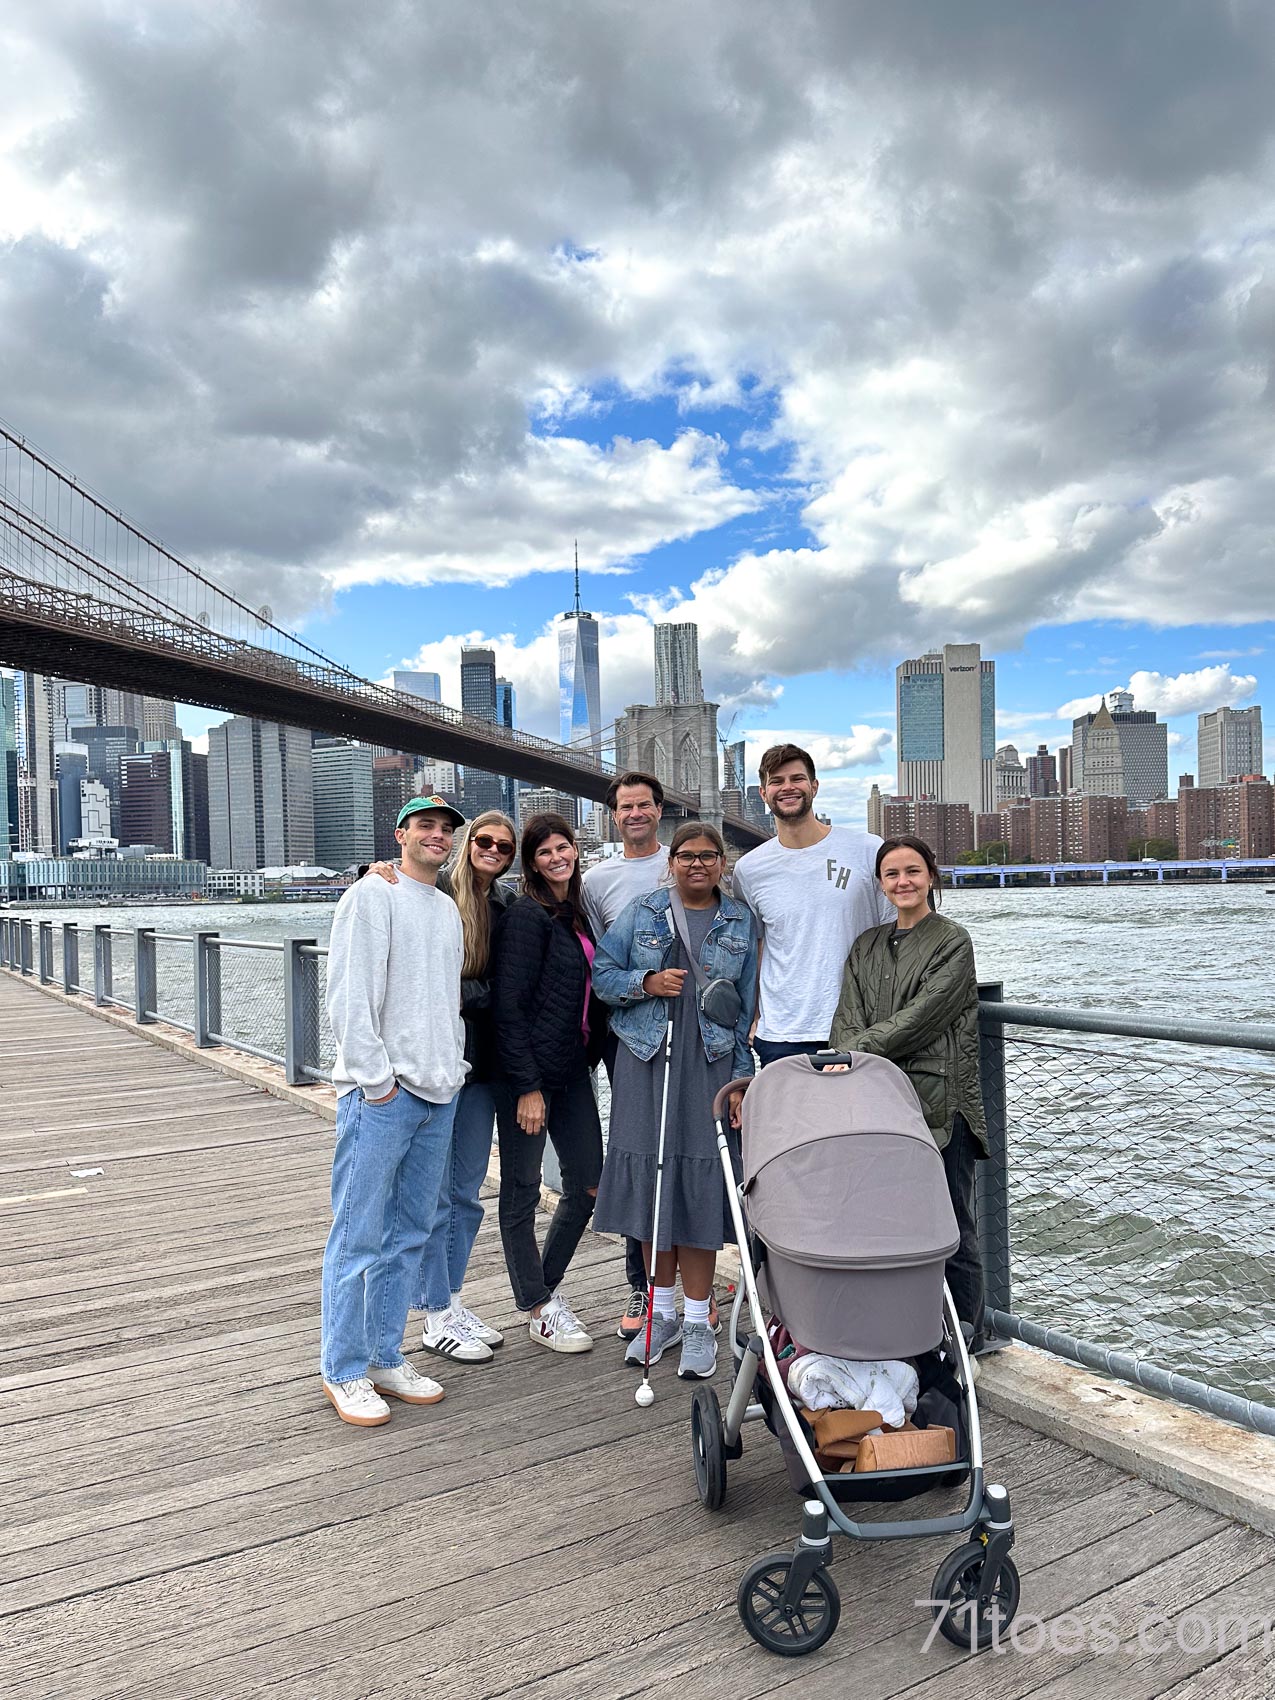 Elle, Carson, Shawni, David, Lucy, Max and Abby taking in the city skyline of New York City